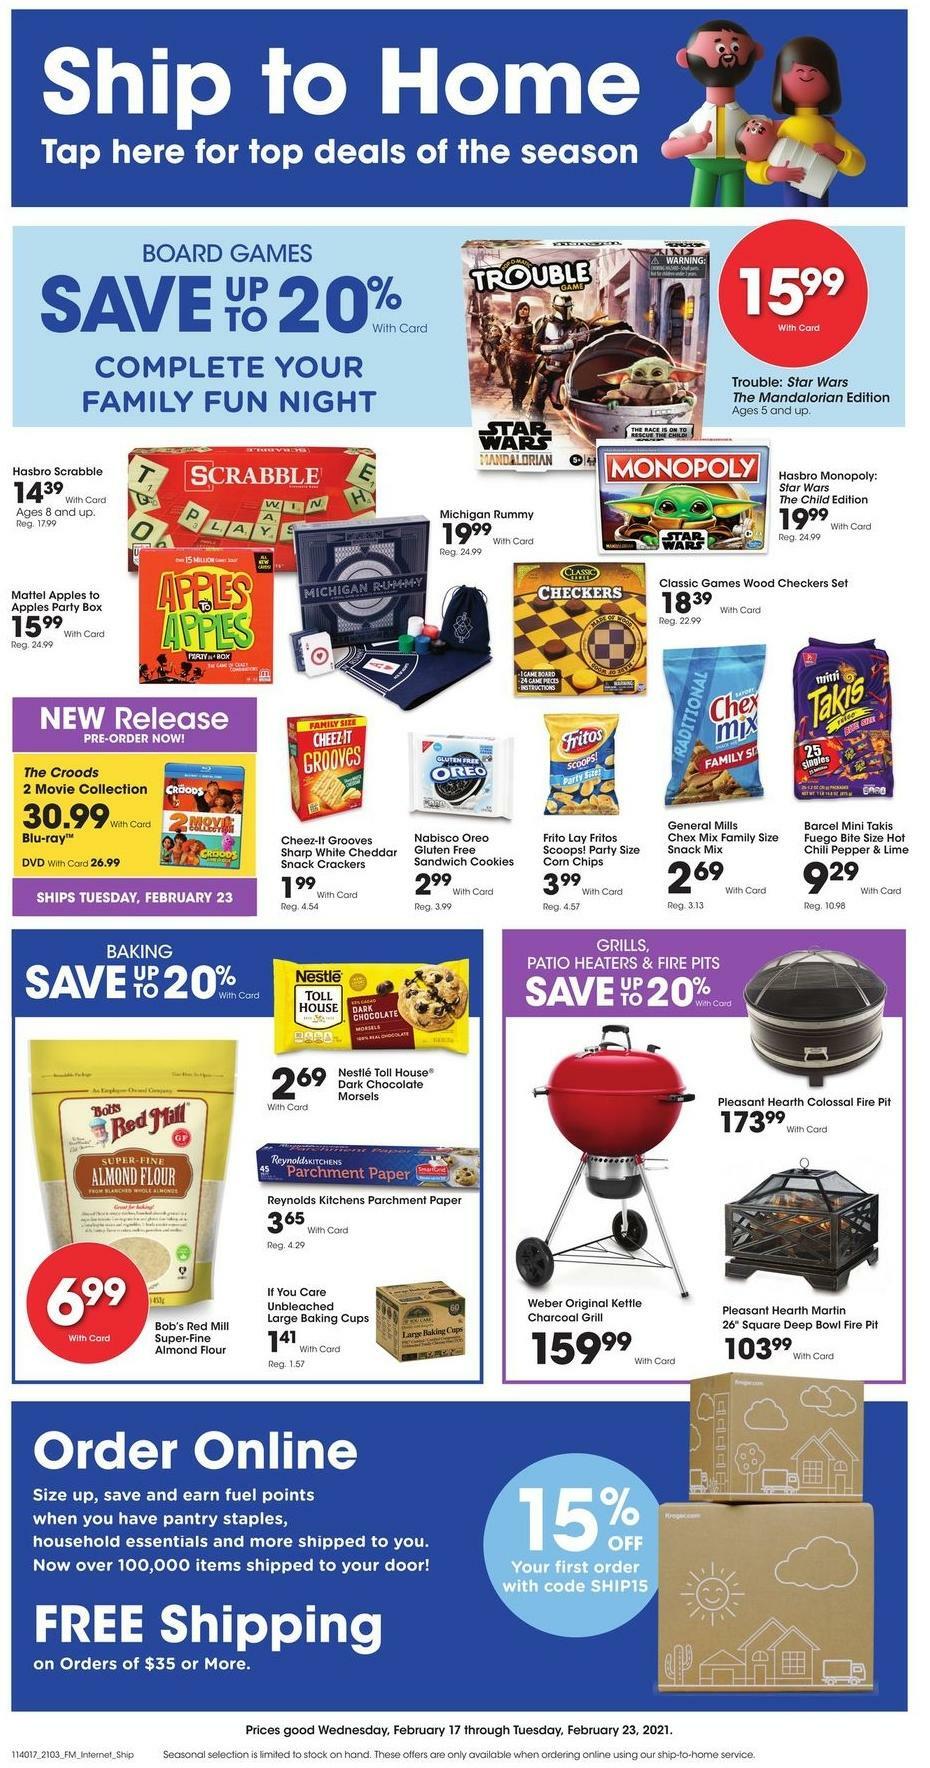 Fred Meyer Ship to Home Weekly Ad from February 17